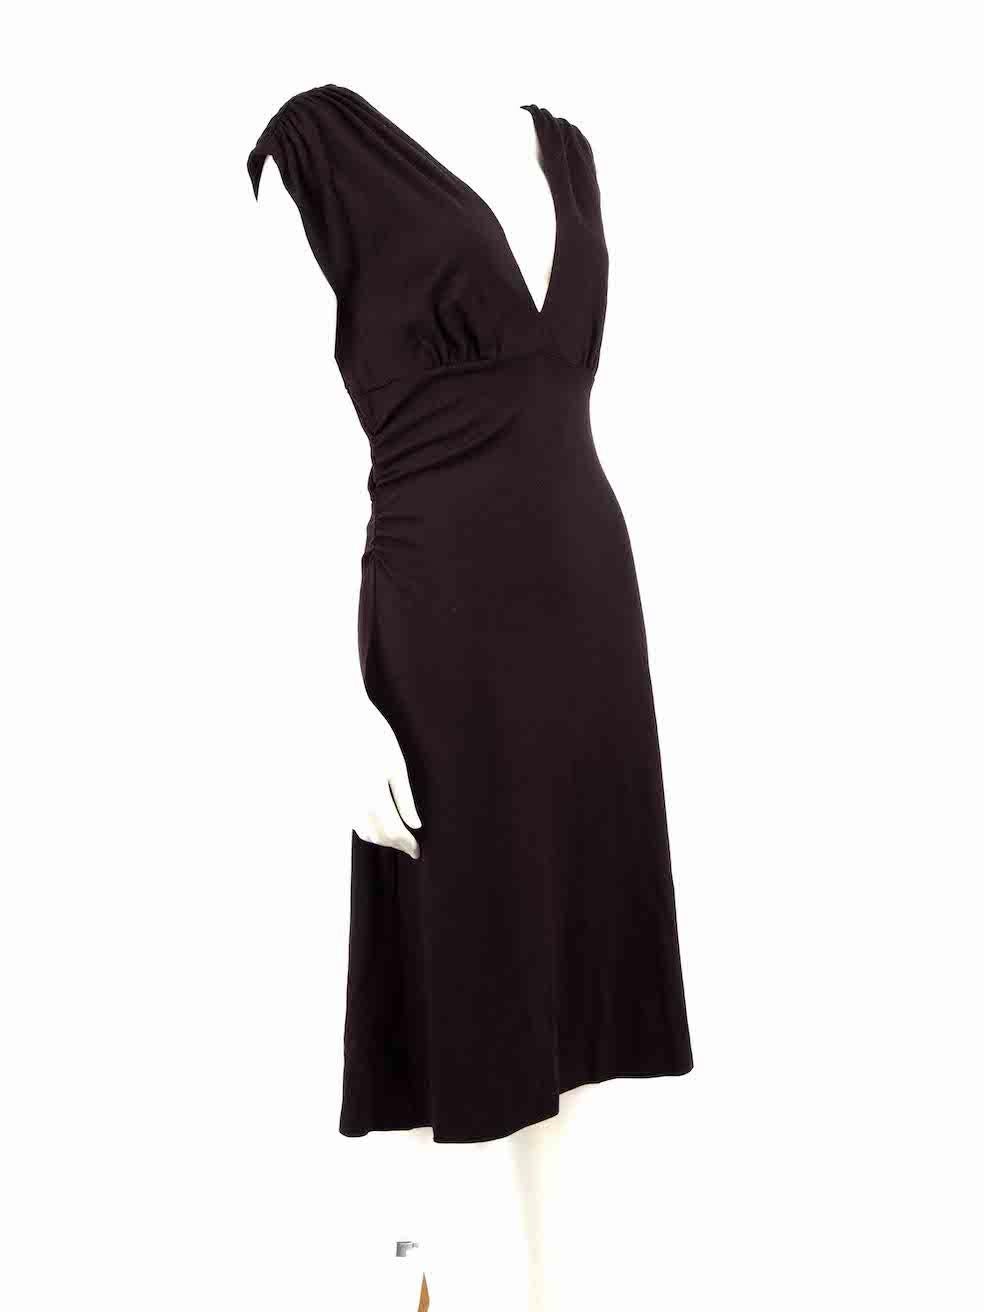 CONDITION is Very good. Hardly any visible wear to dress is evident on this used Diane Von Furstenberg designer resale item.
 
 
 
 Details
 
 
 Dark purple
 
 Wool
 
 Dress
 
 V-neck
 
 Sleeveless
 
 Knee length
 
 Ruched side detail
 
 
 
 
 
